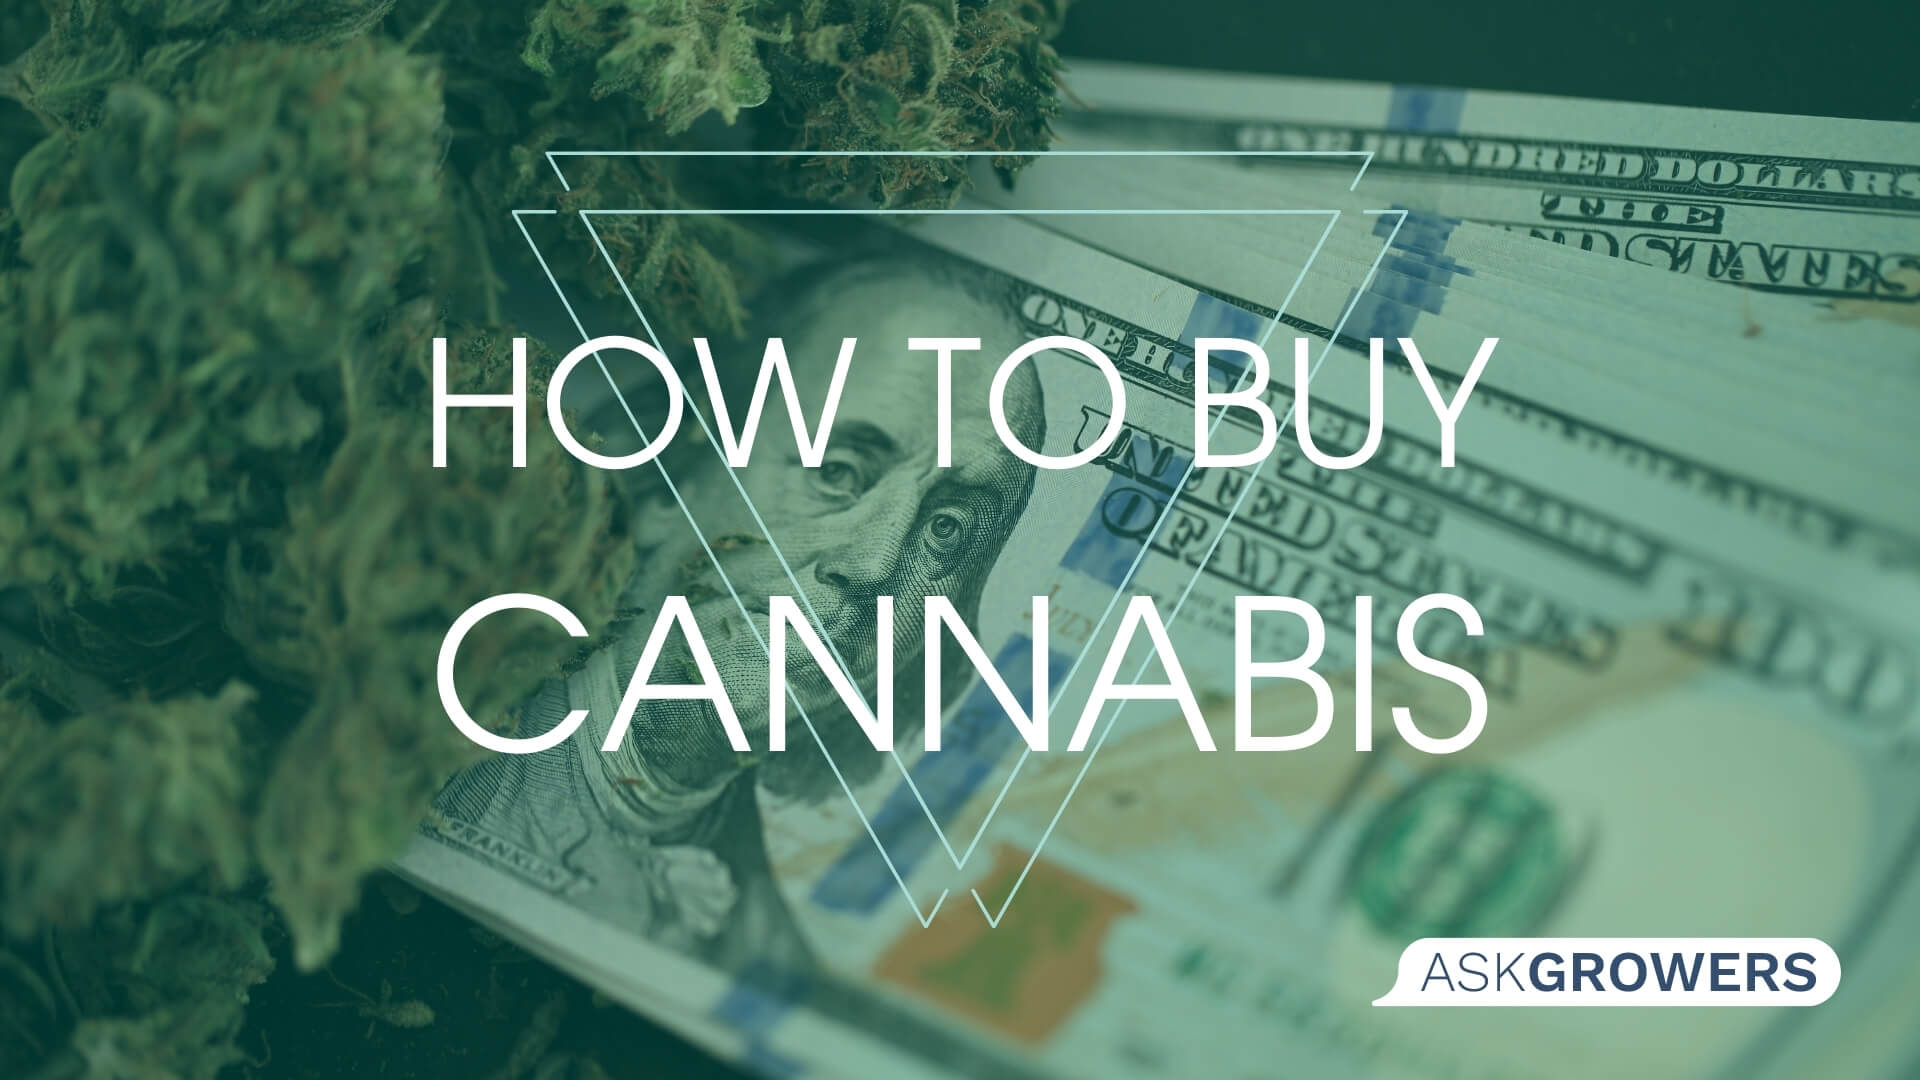 Steps to Buying Cannabis Safely and Legally